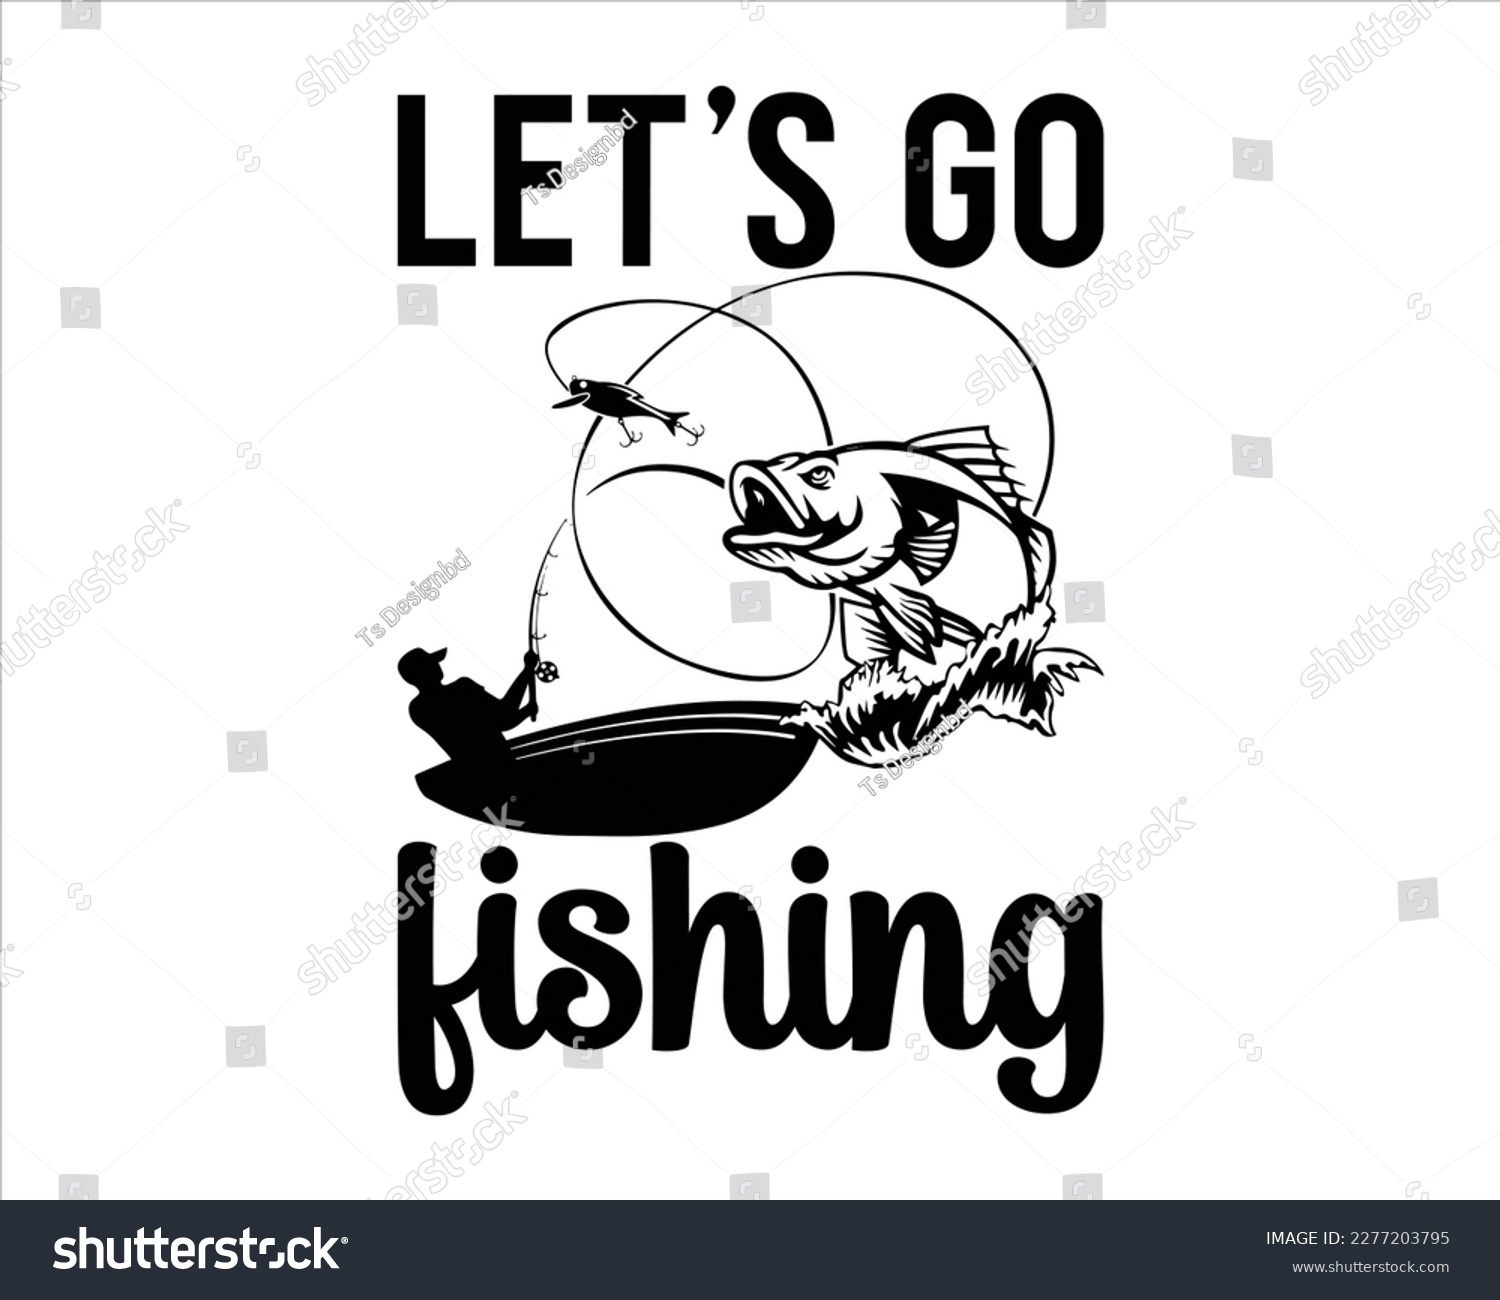 SVG of Let's Go Fishing Svg Design,Fishing Quote Svg,Fishing Silhouette,Fisherman saying eps files,Fishing Quotes SVG Cut Files Designs, Saying about Fishing, svg